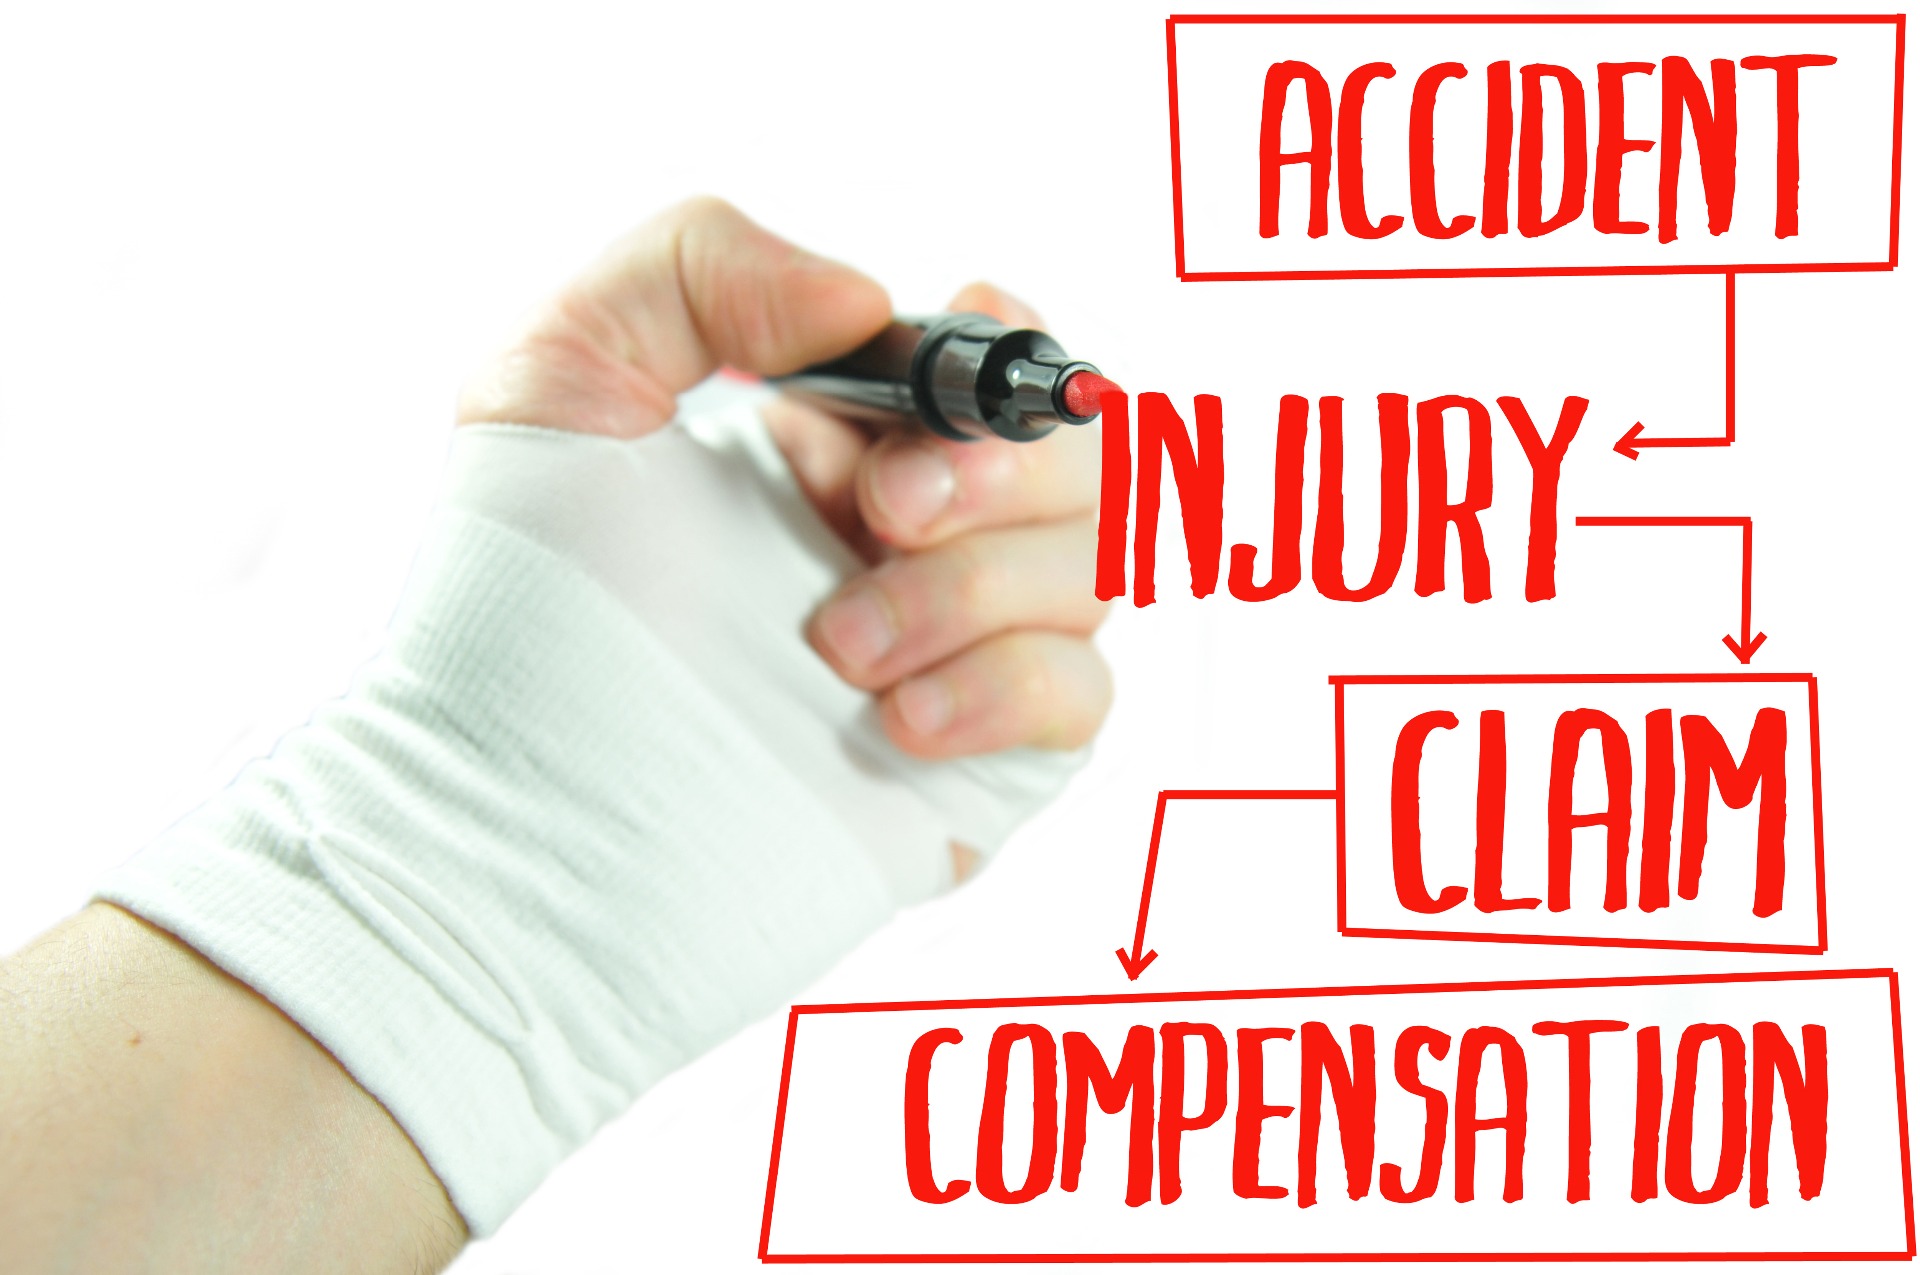 Accident Injury Claim Compensation written in Red with a marker pen